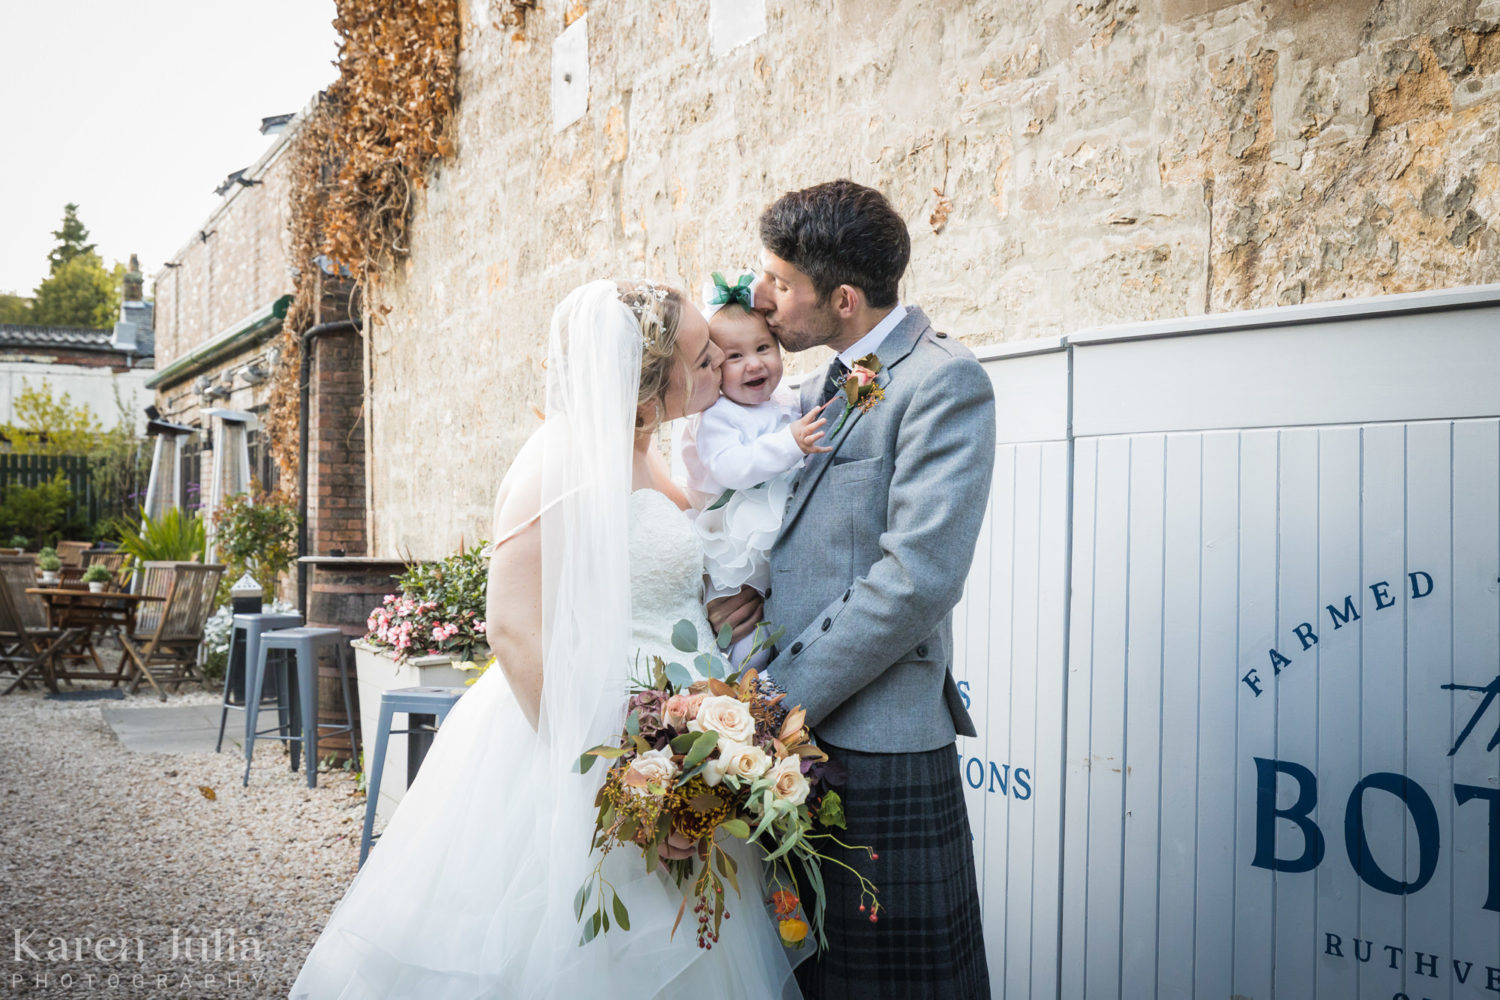 bride and groom portrait kissing the chubby cheeks of their baby at the entrance to the Bothy